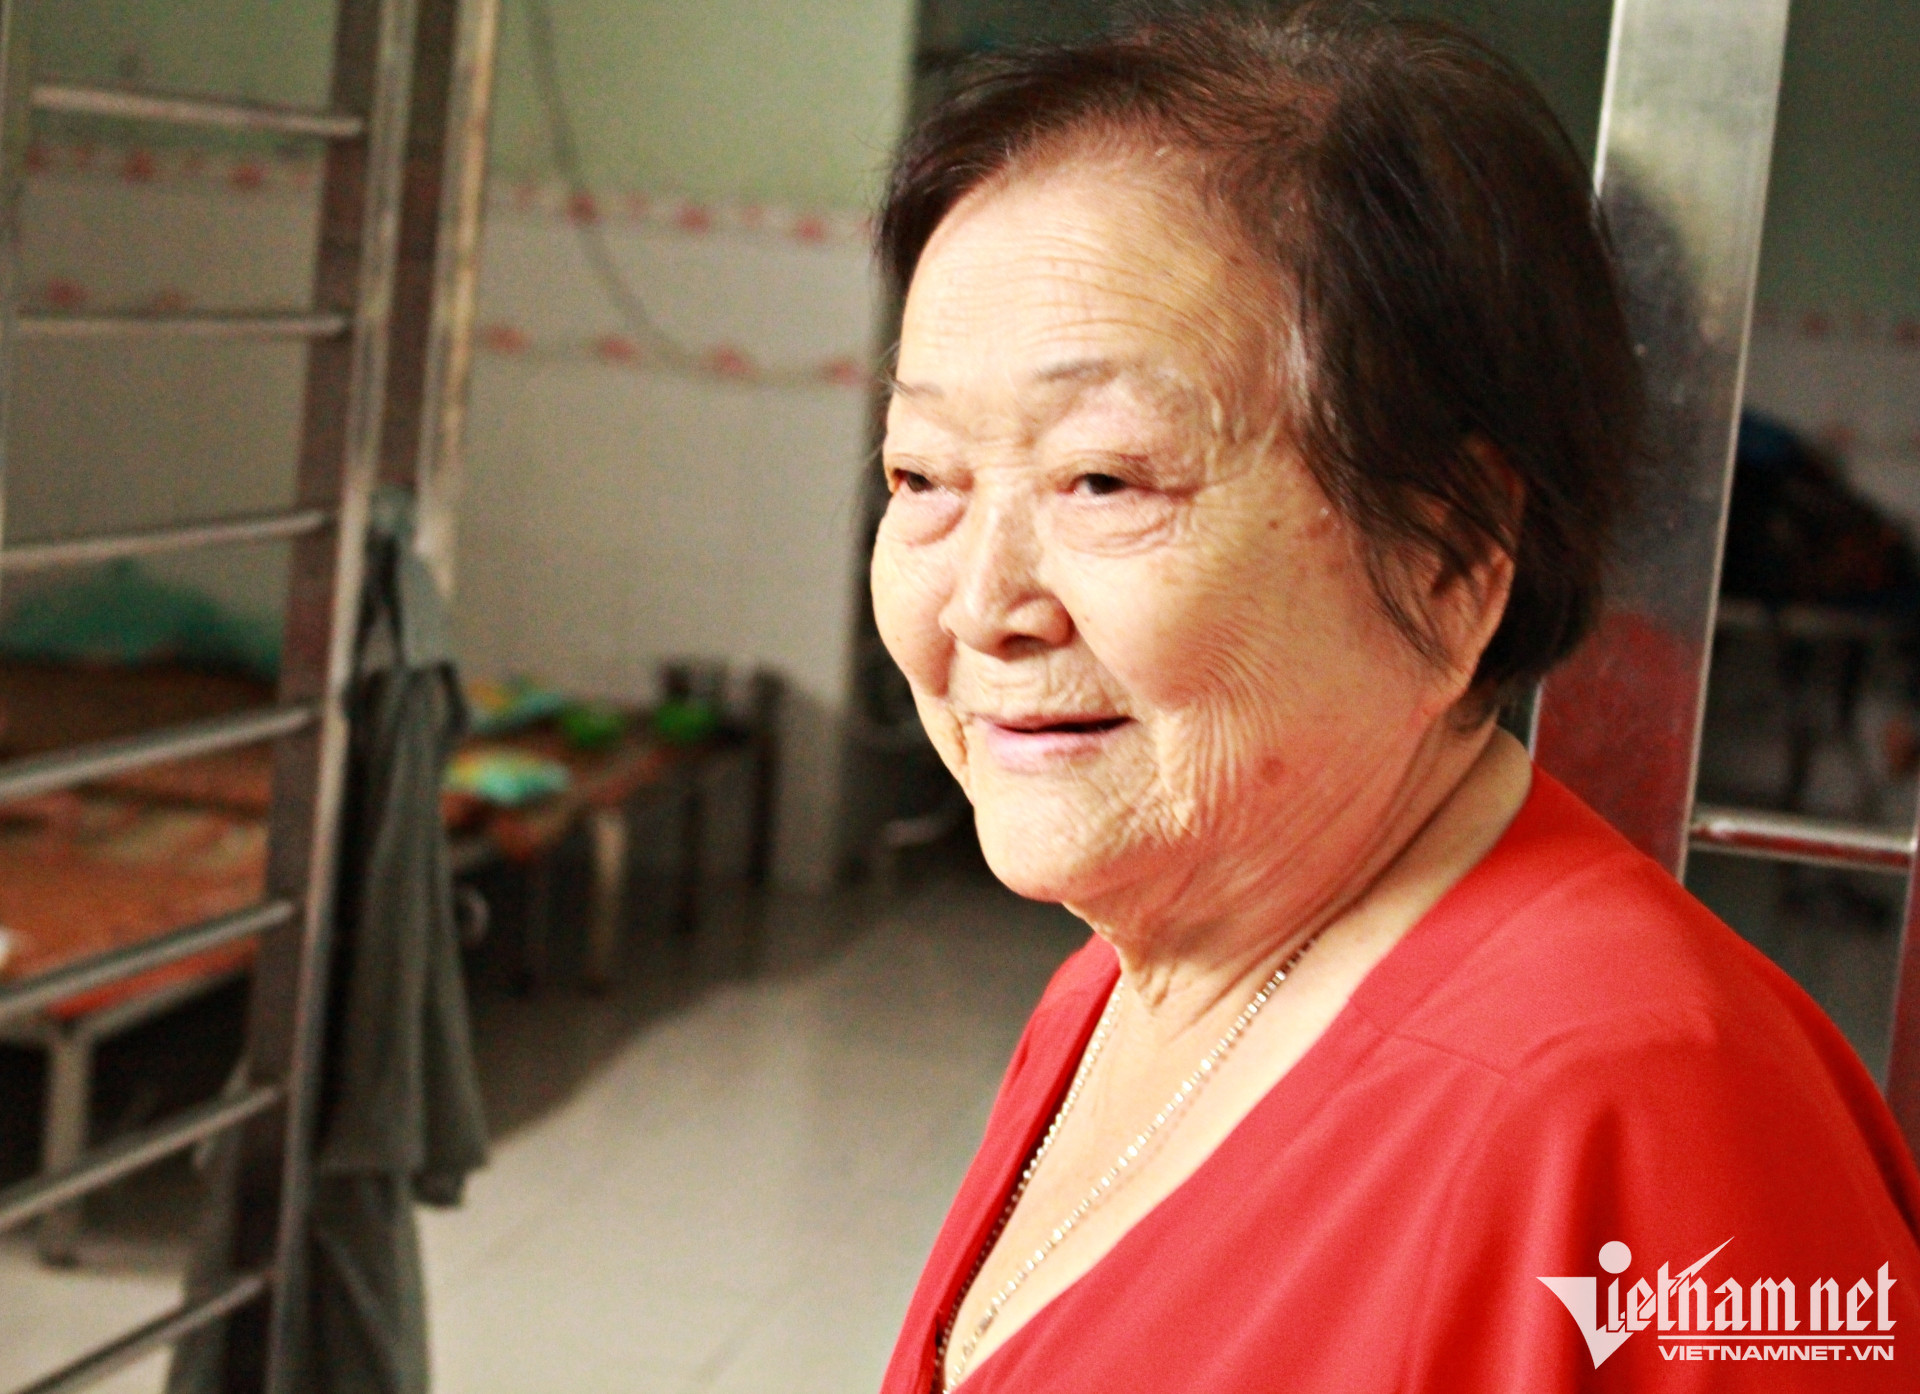 ‘Mama Muoi’ sells house, spends half her life taking care of 100 disabled children